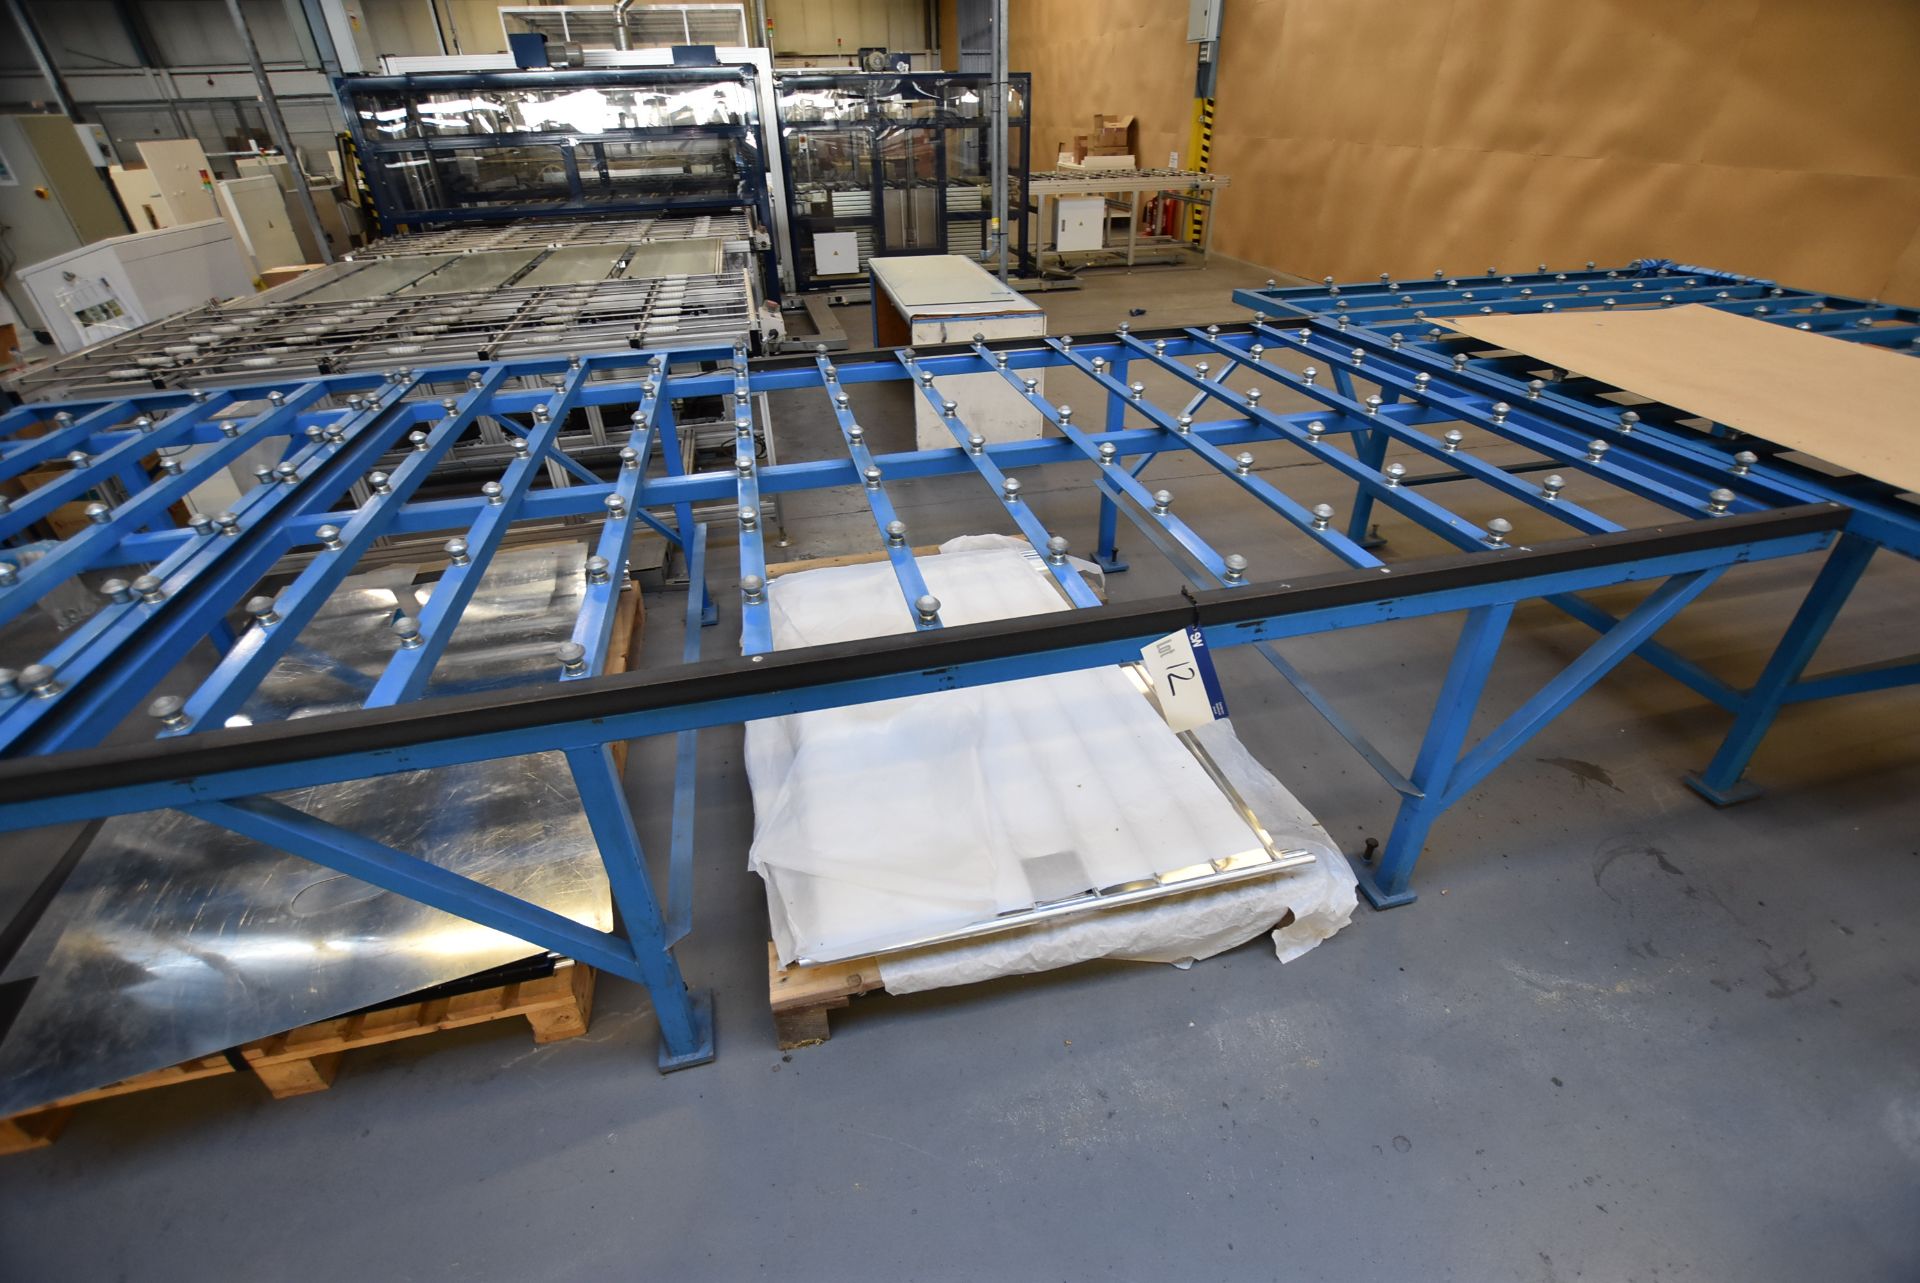 Stationary Steel Framed Roller Ball Feed Table, approx. 3m x 2m x 880mm high